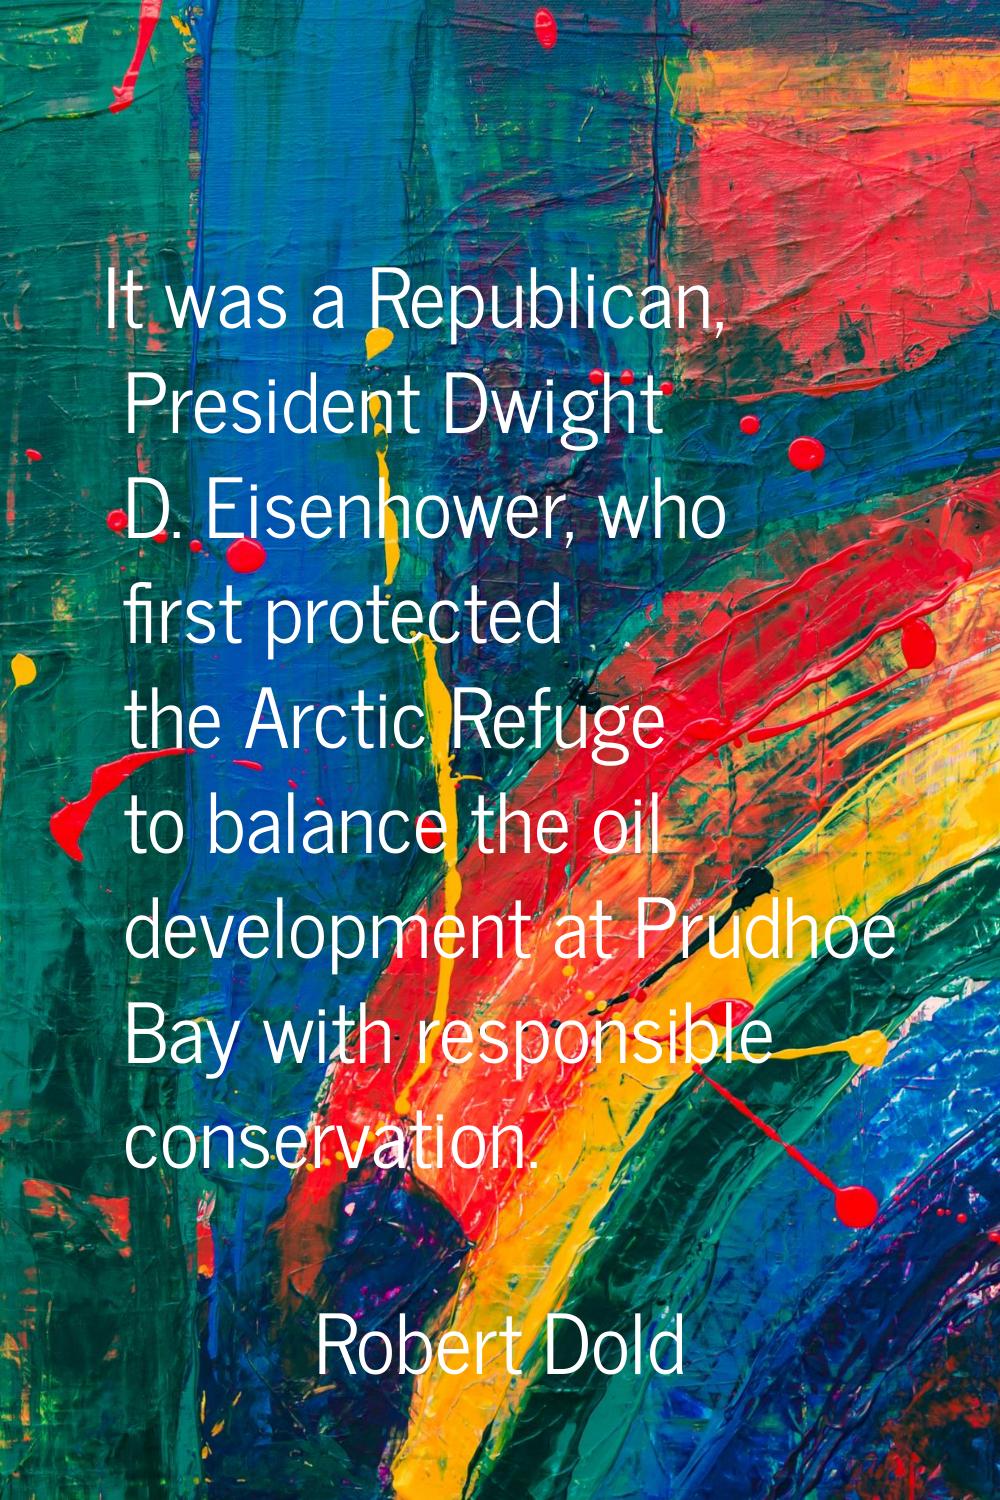 It was a Republican, President Dwight D. Eisenhower, who first protected the Arctic Refuge to balan